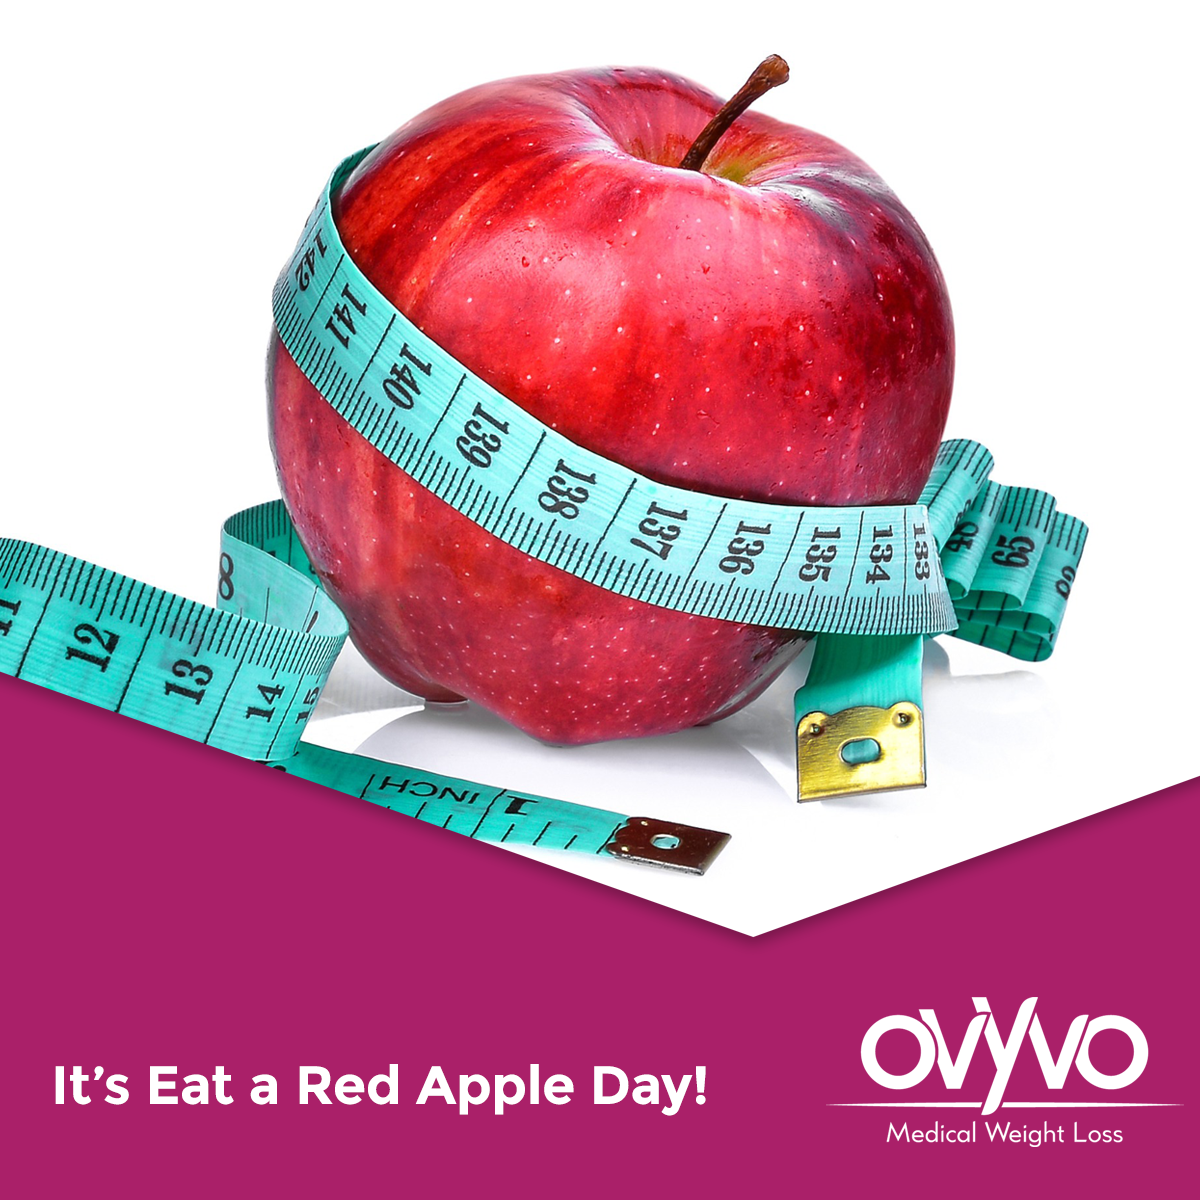 Eat a Red Apple Day - Weight Loss Benefits of Eating Apples